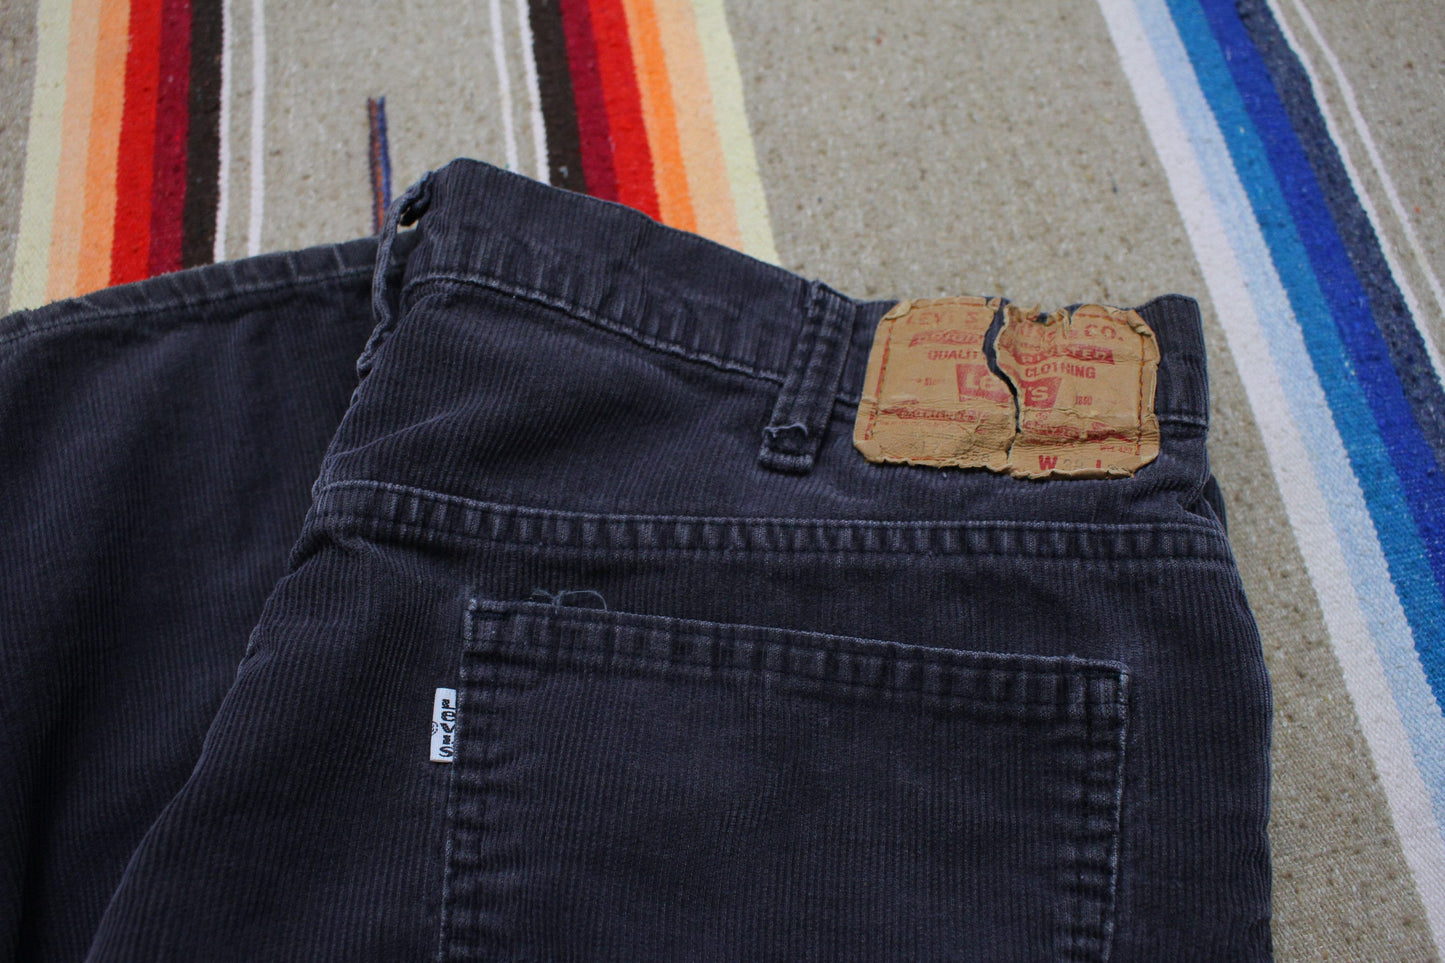 1980s Levi's 517 Charcoal Grey Corduroy Pants Made in USA Size 36x28